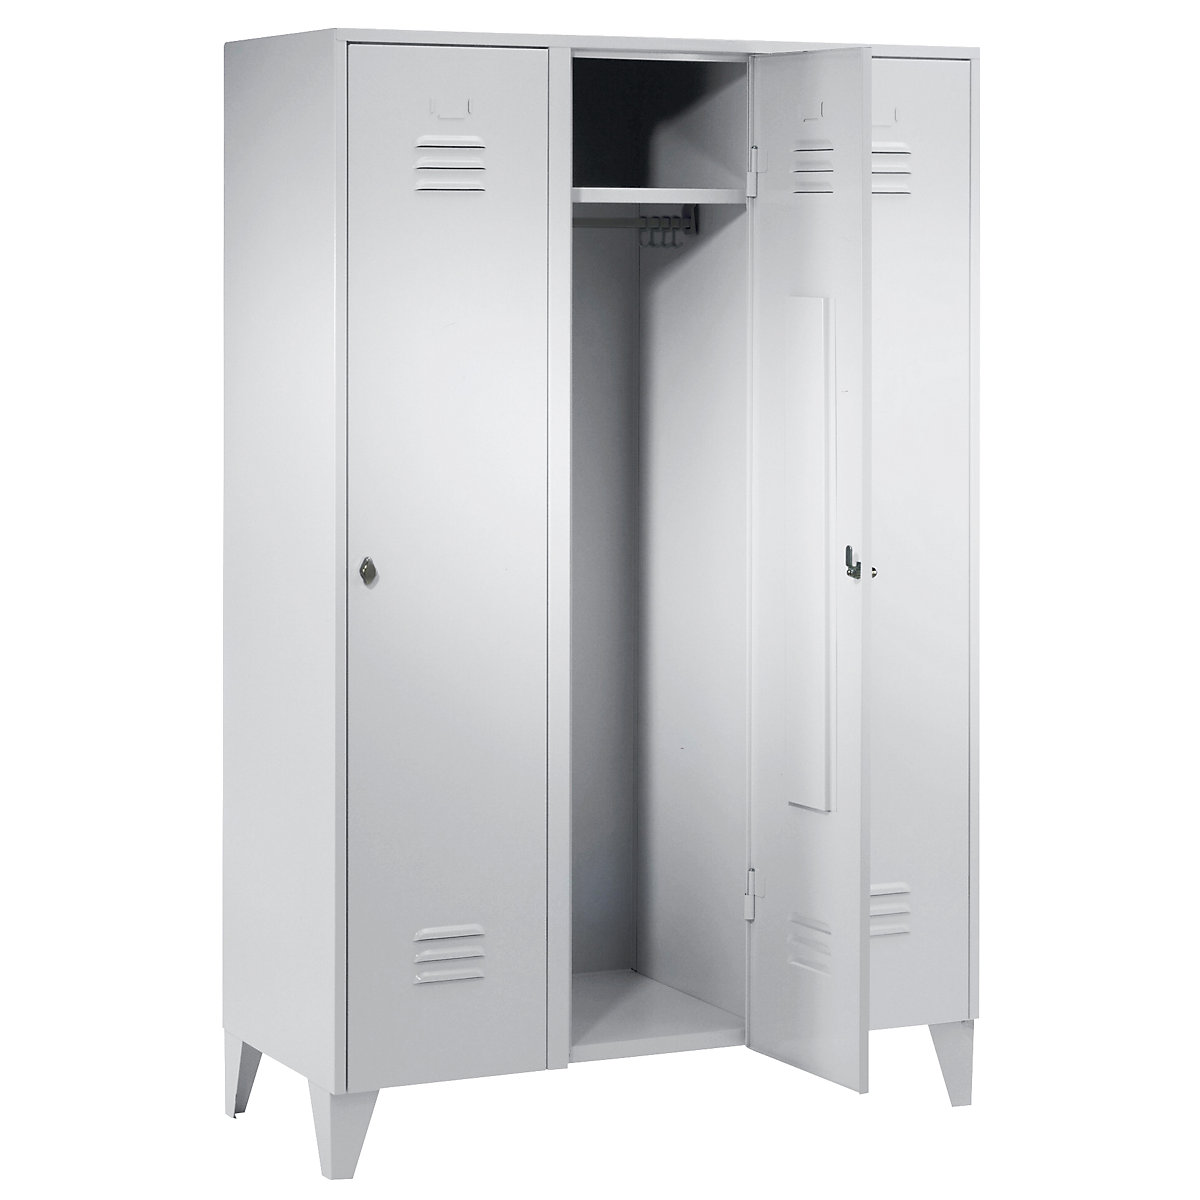 Steel locker with stud feet – Wolf, full height compartments, solid doors, compartment width 400 mm, 3 compartments, light grey-51